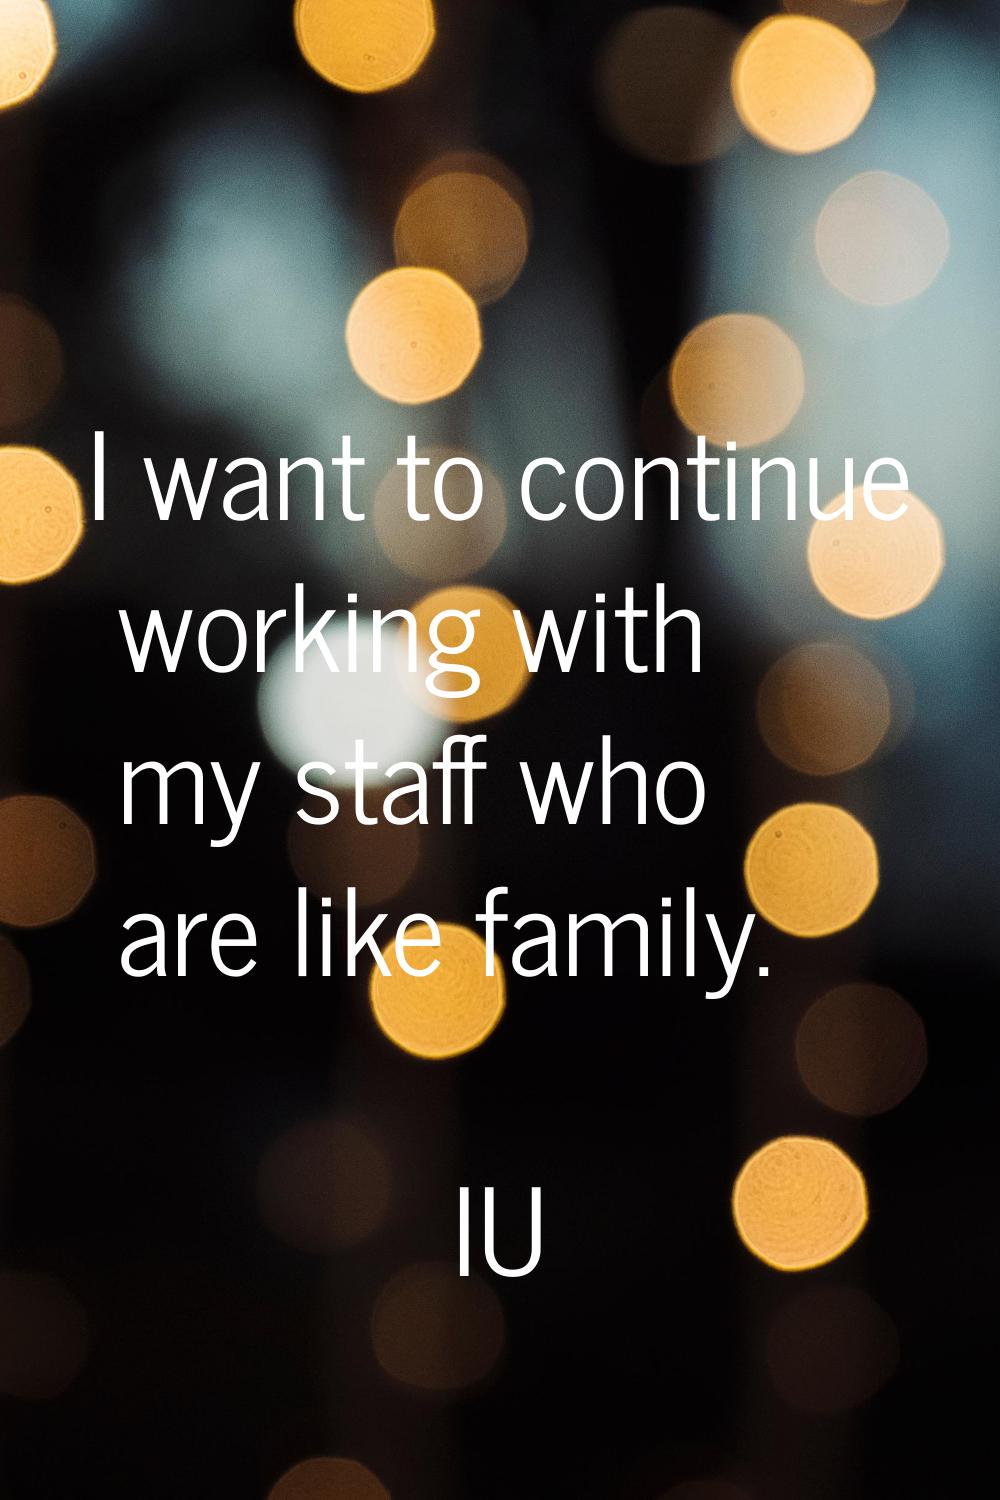 I want to continue working with my staff who are like family.